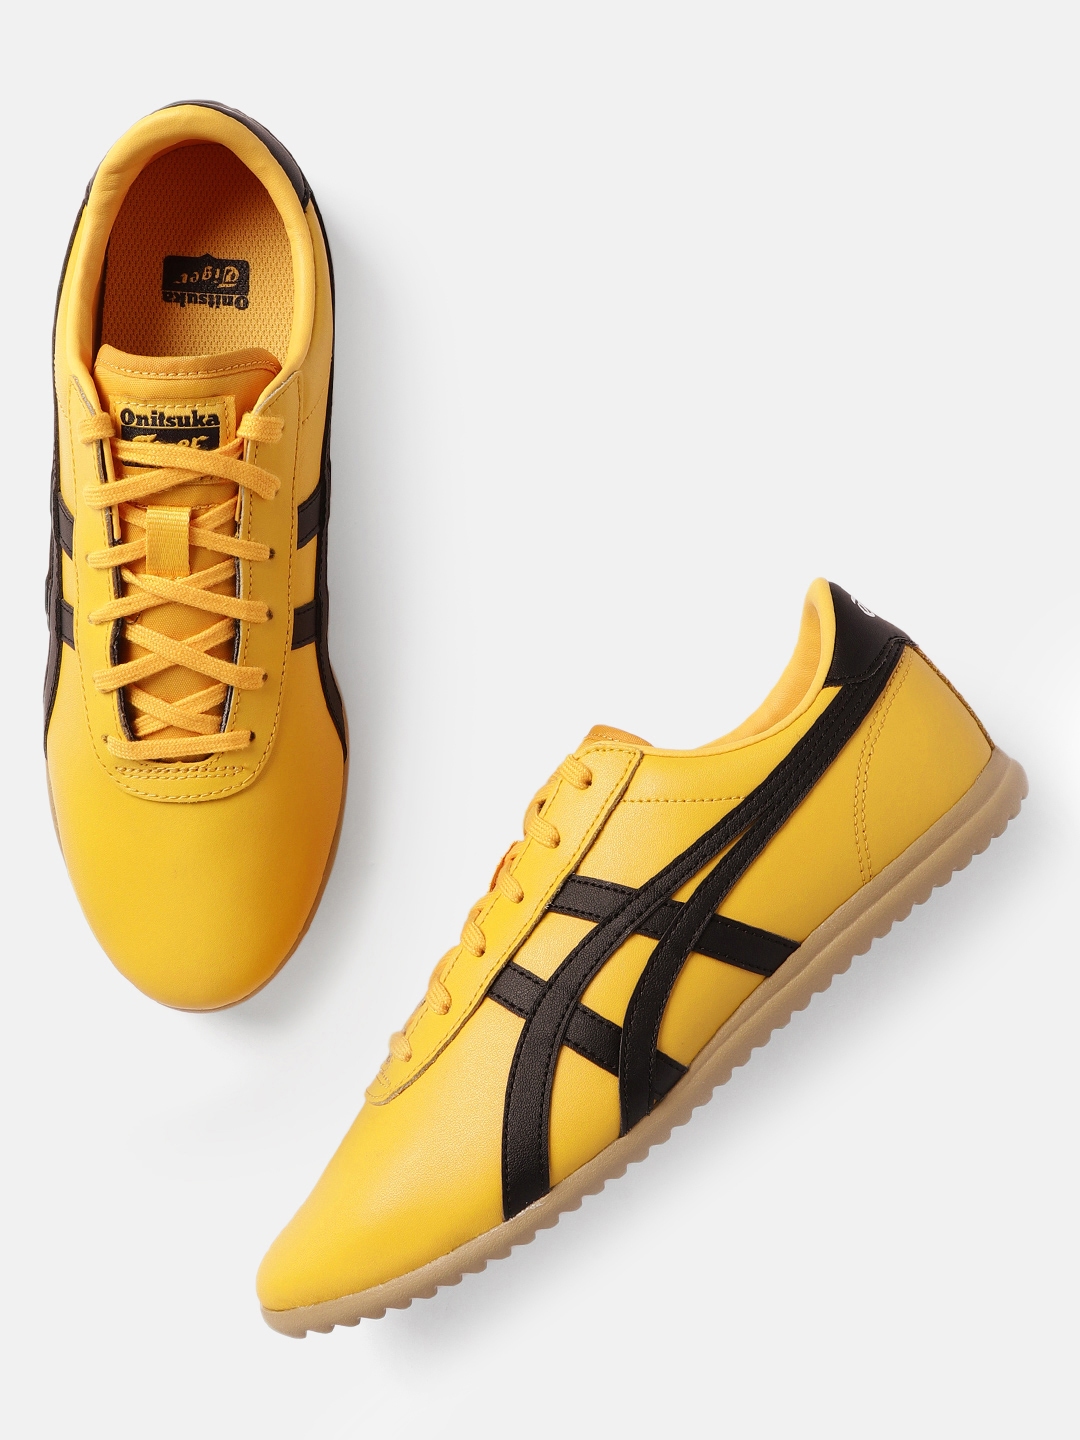 Buy Onitsuka Tiger Unisex Yellow Leather Sneakers Tai Chi Reb - Casual ...